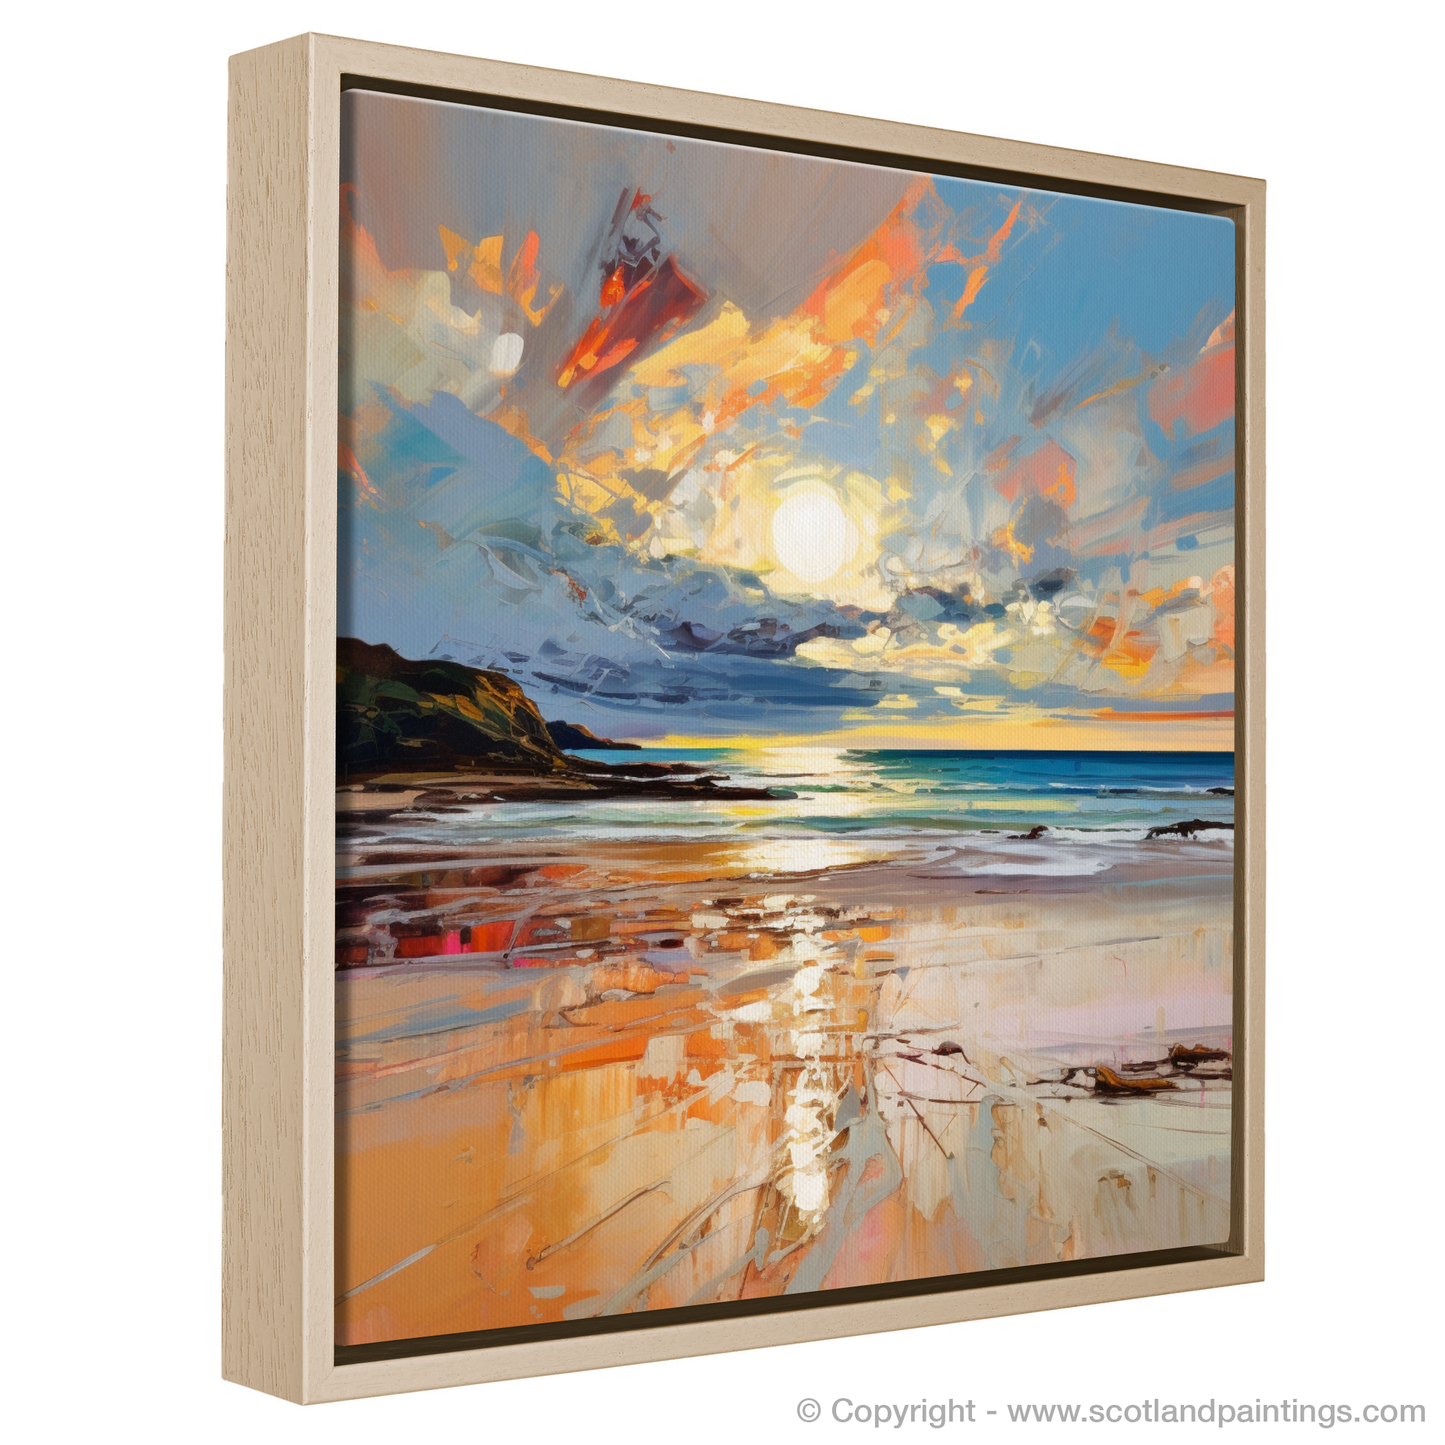 Painting and Art Print of Gullane Beach at sunset entitled "Gullane Beach at Sunset: An Expressionist Ode to Scottish Shores".